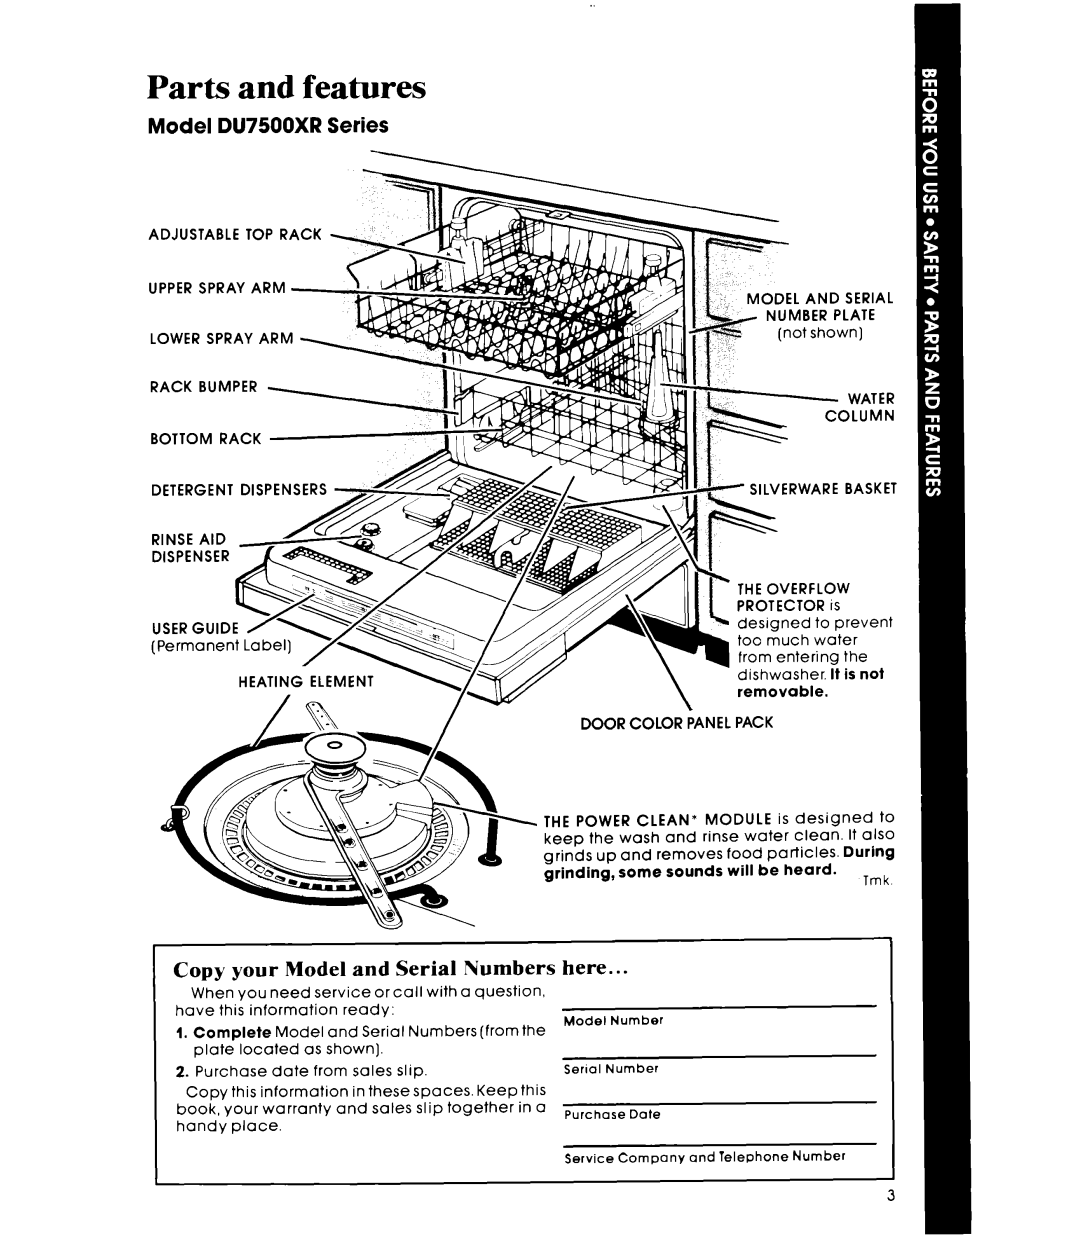 Whirlpool DU7500XR Series manual and features, Parts, Copy your Model and Serial Numbers here 